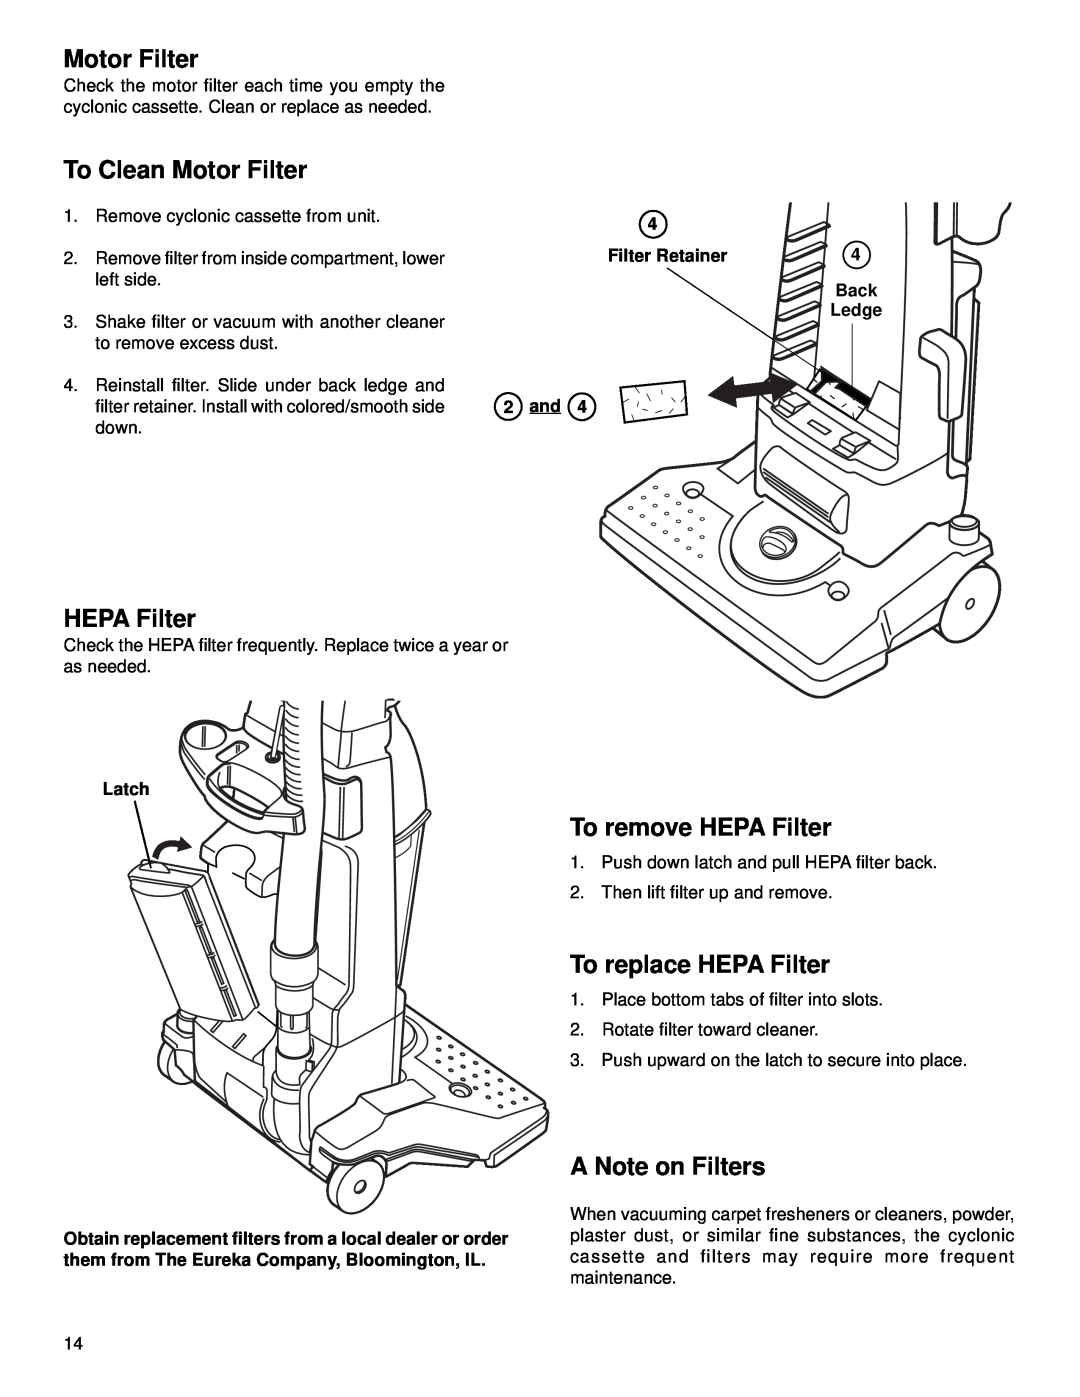 Eureka 4500 To Clean Motor Filter, To remove HEPA Filter, To replace HEPA Filter, A Note on Filters, and, Latch 